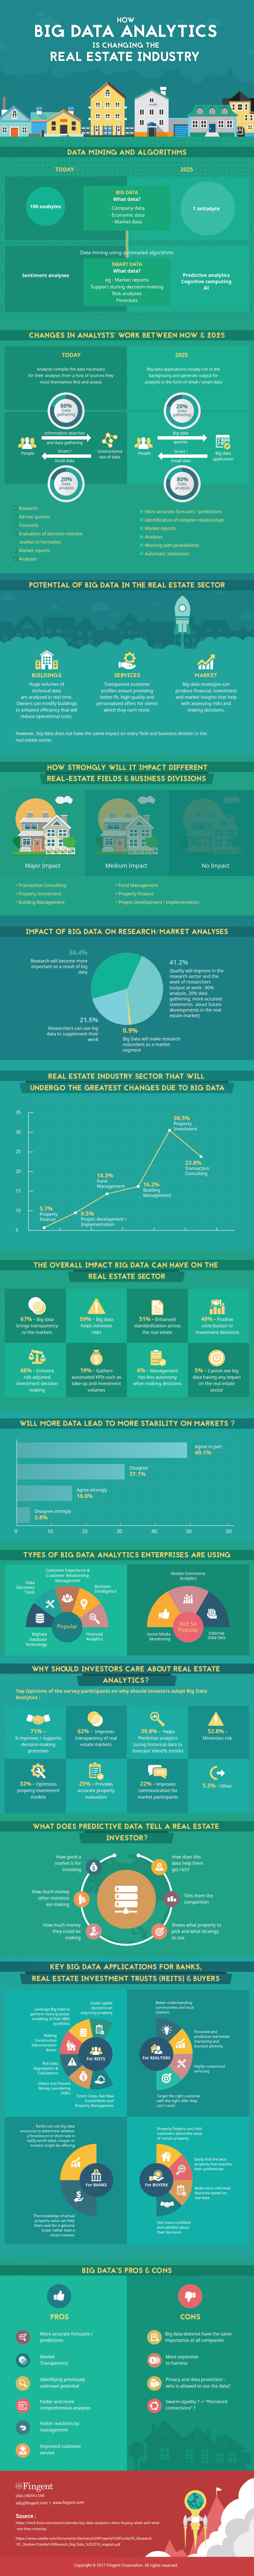 How Big Data Analytics is Changing the Real Estate Industry